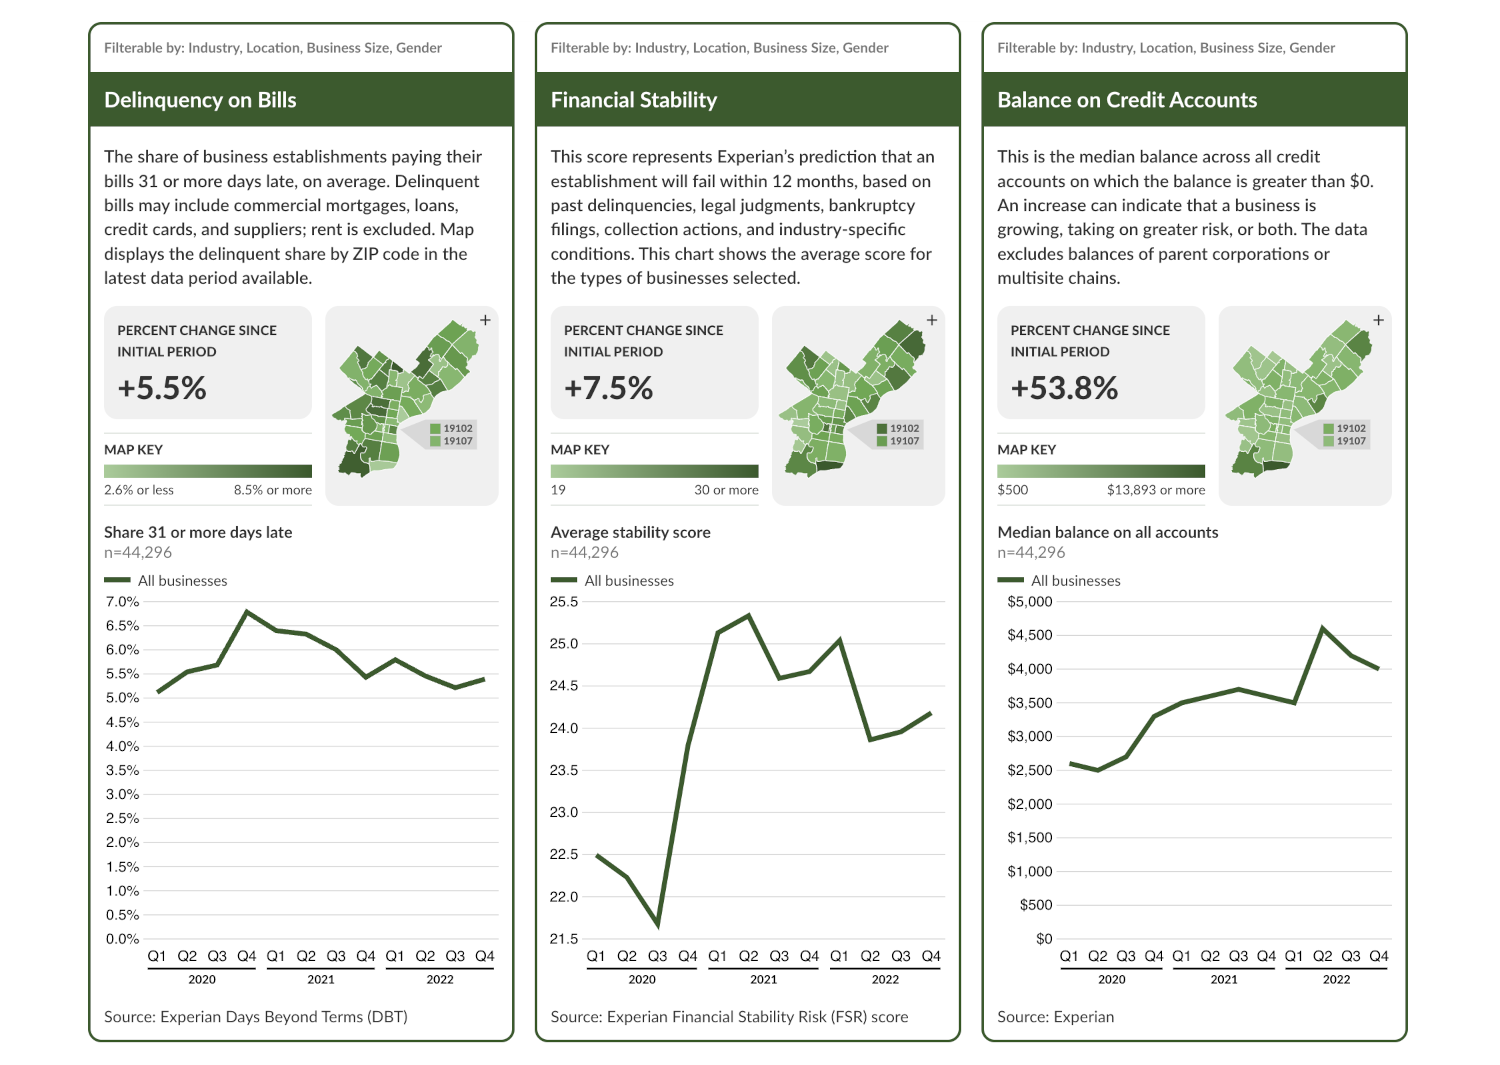 Data dashboard showing zip-code map and line graphs for three economic indicators: delinquency on bills, financial stability, and balance on credit accounts.